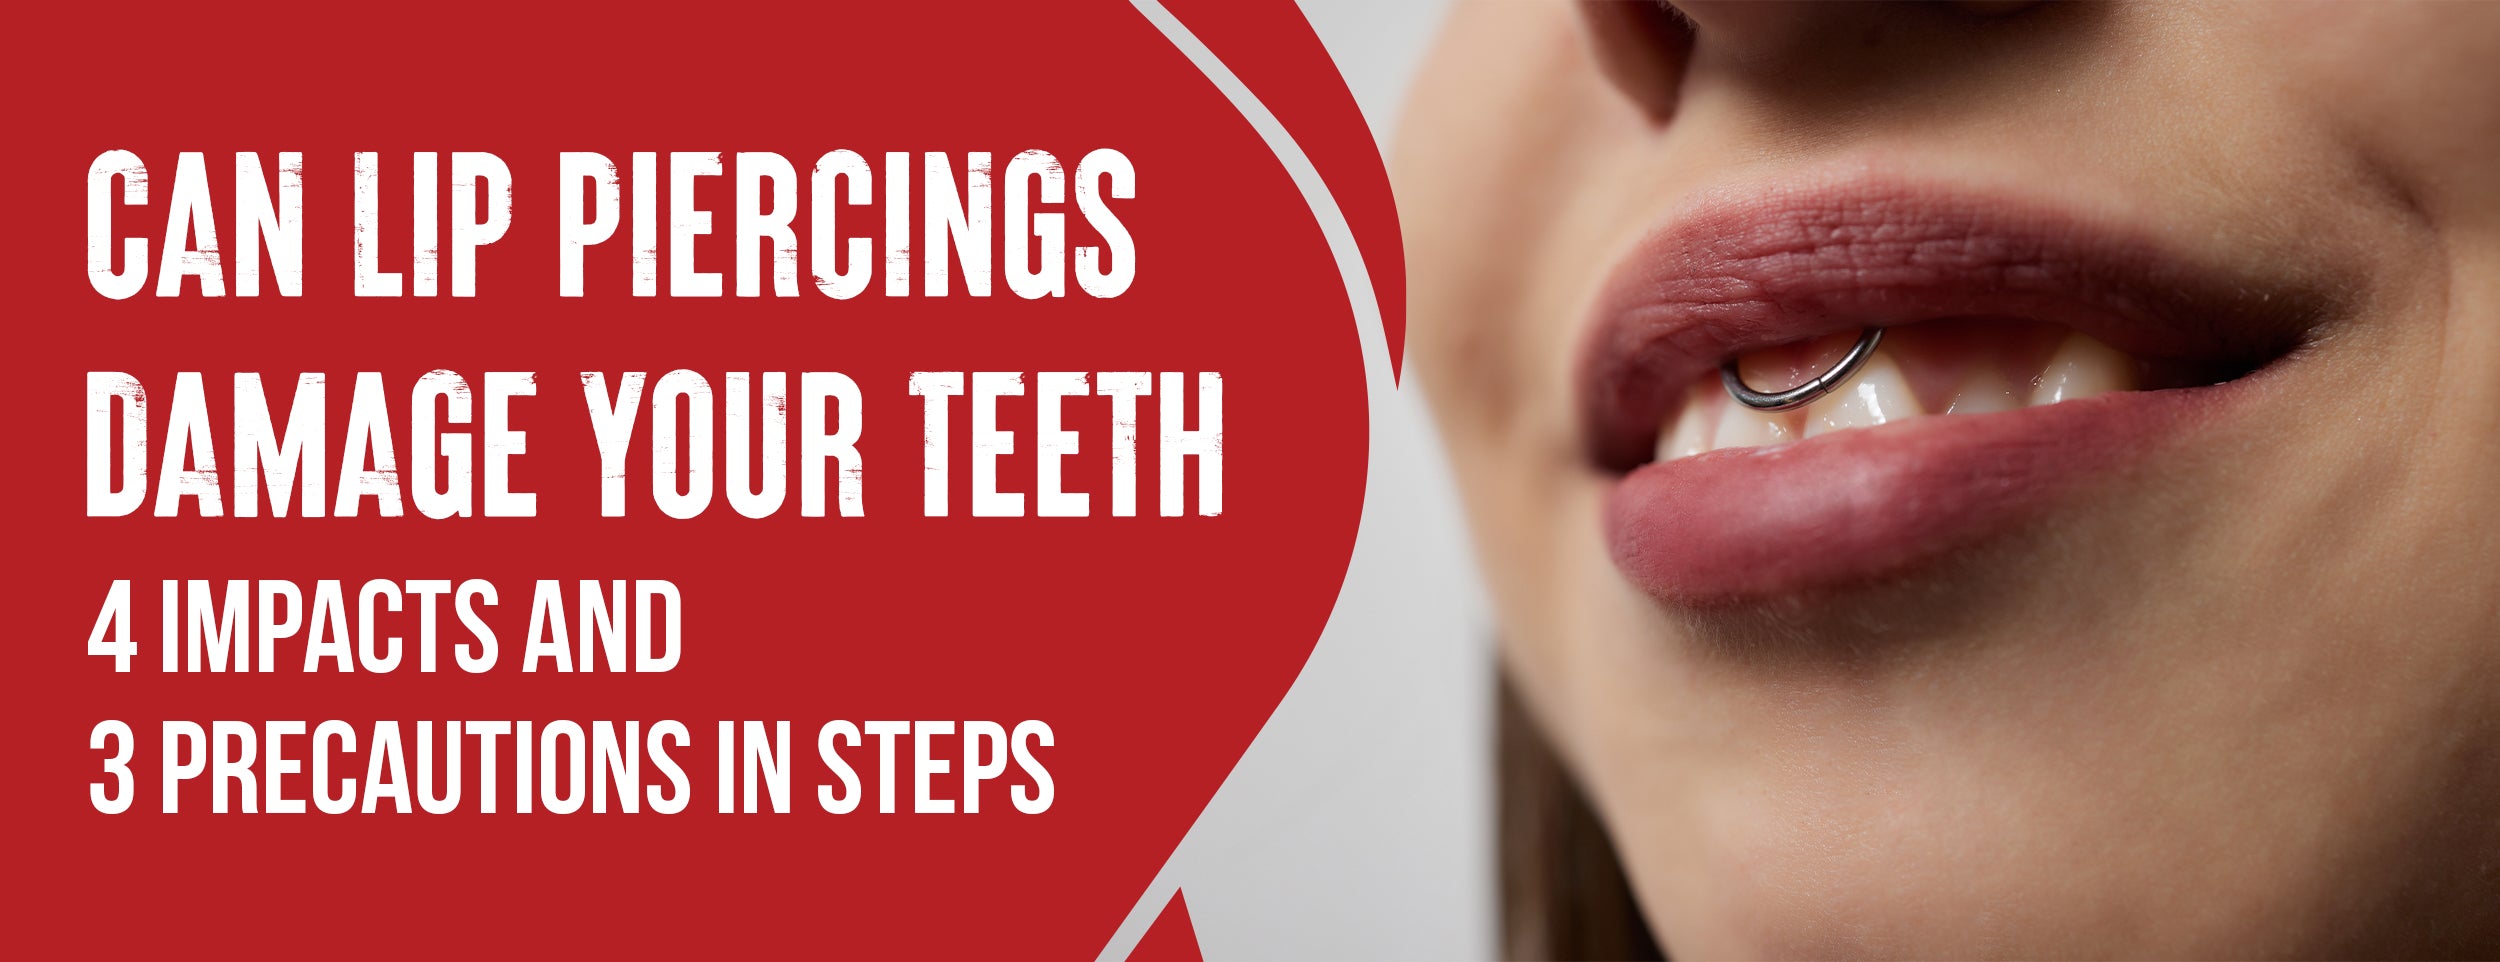 The Impact and Precautions of Lip Piercings on Your Teeth